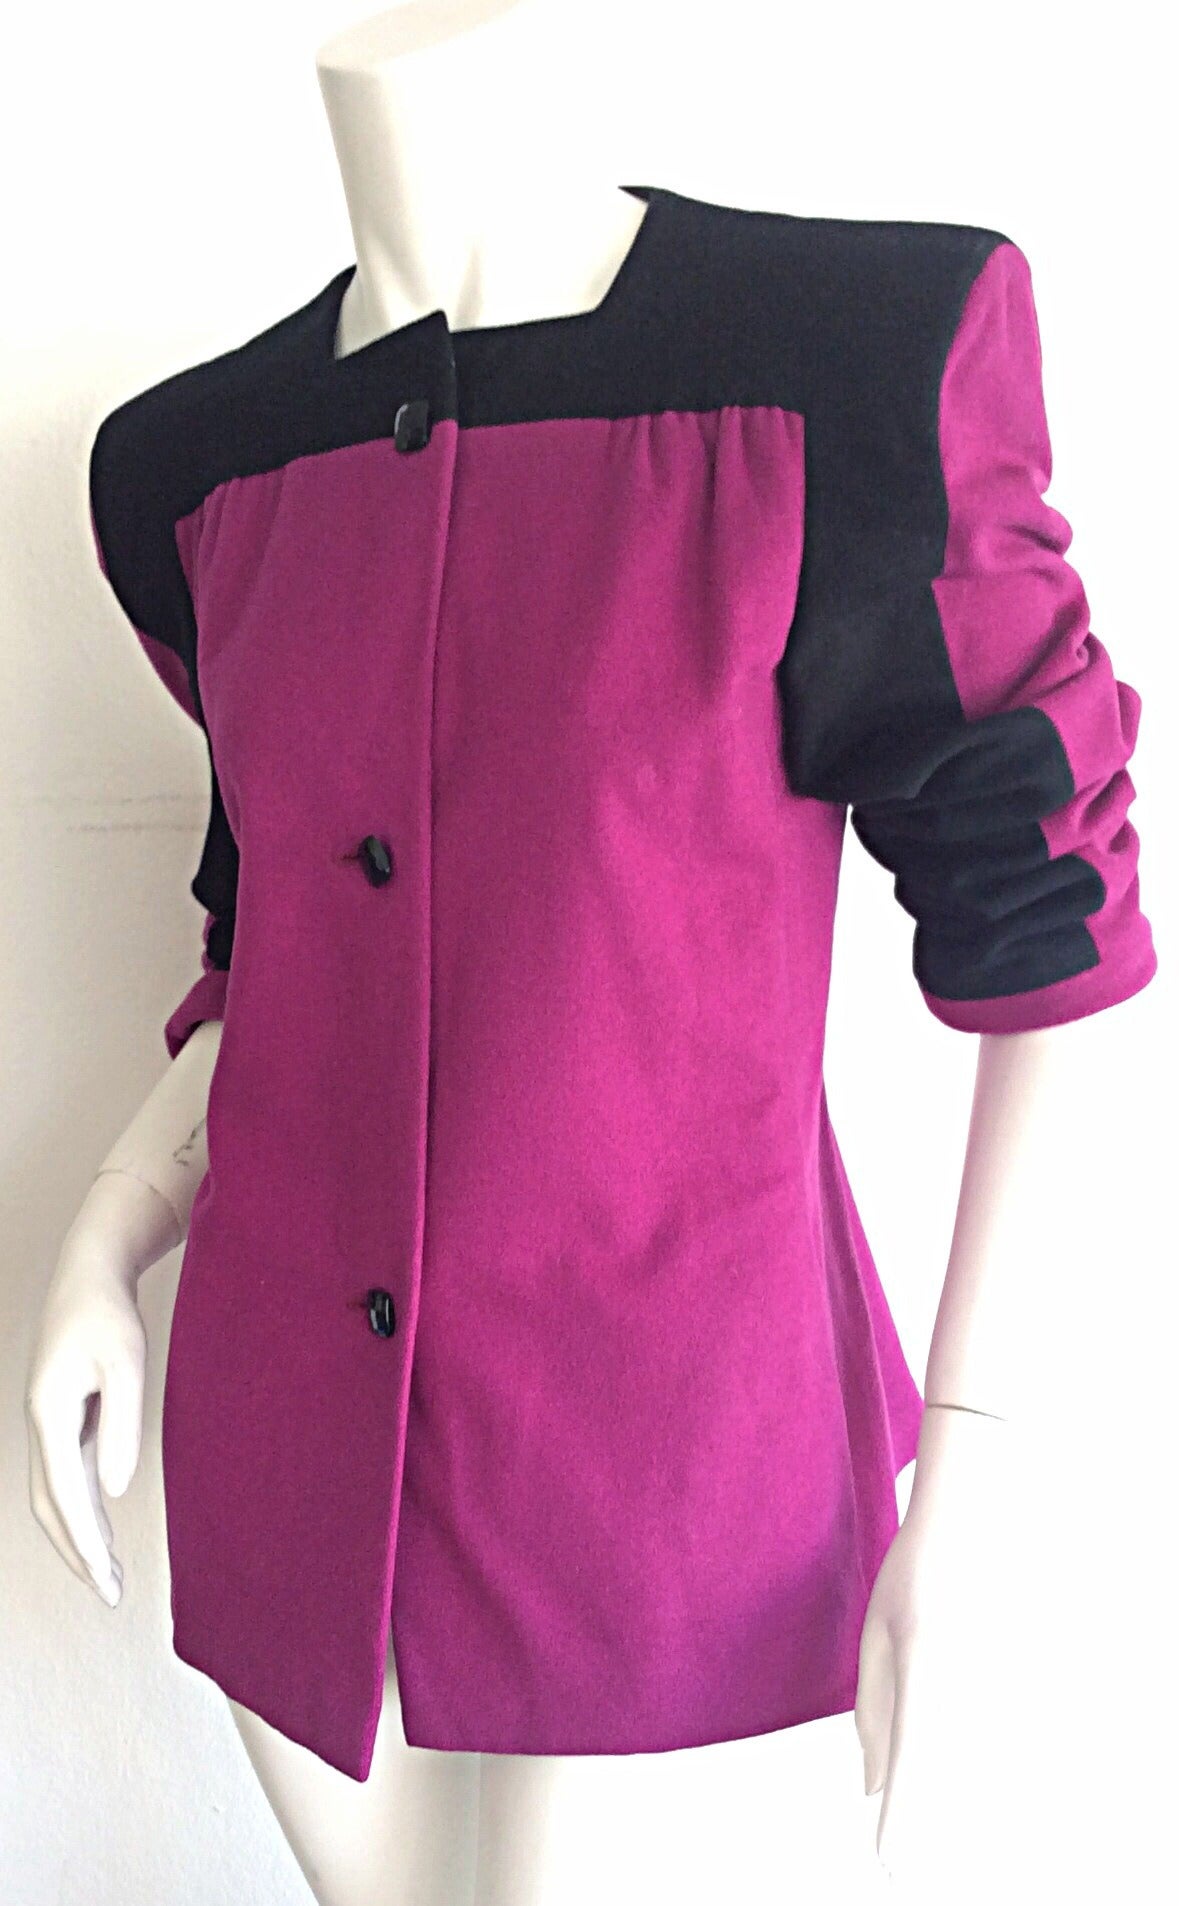 Stunning vintage Carolina Herrera color block jacket. Vibrant hues of fuchsia and black, with cubed black buttons up bodice. The perfect statement piece. Full lined. Approximately Size Medium-Large

Measurements:
38-40 inch bust
36 inch waist